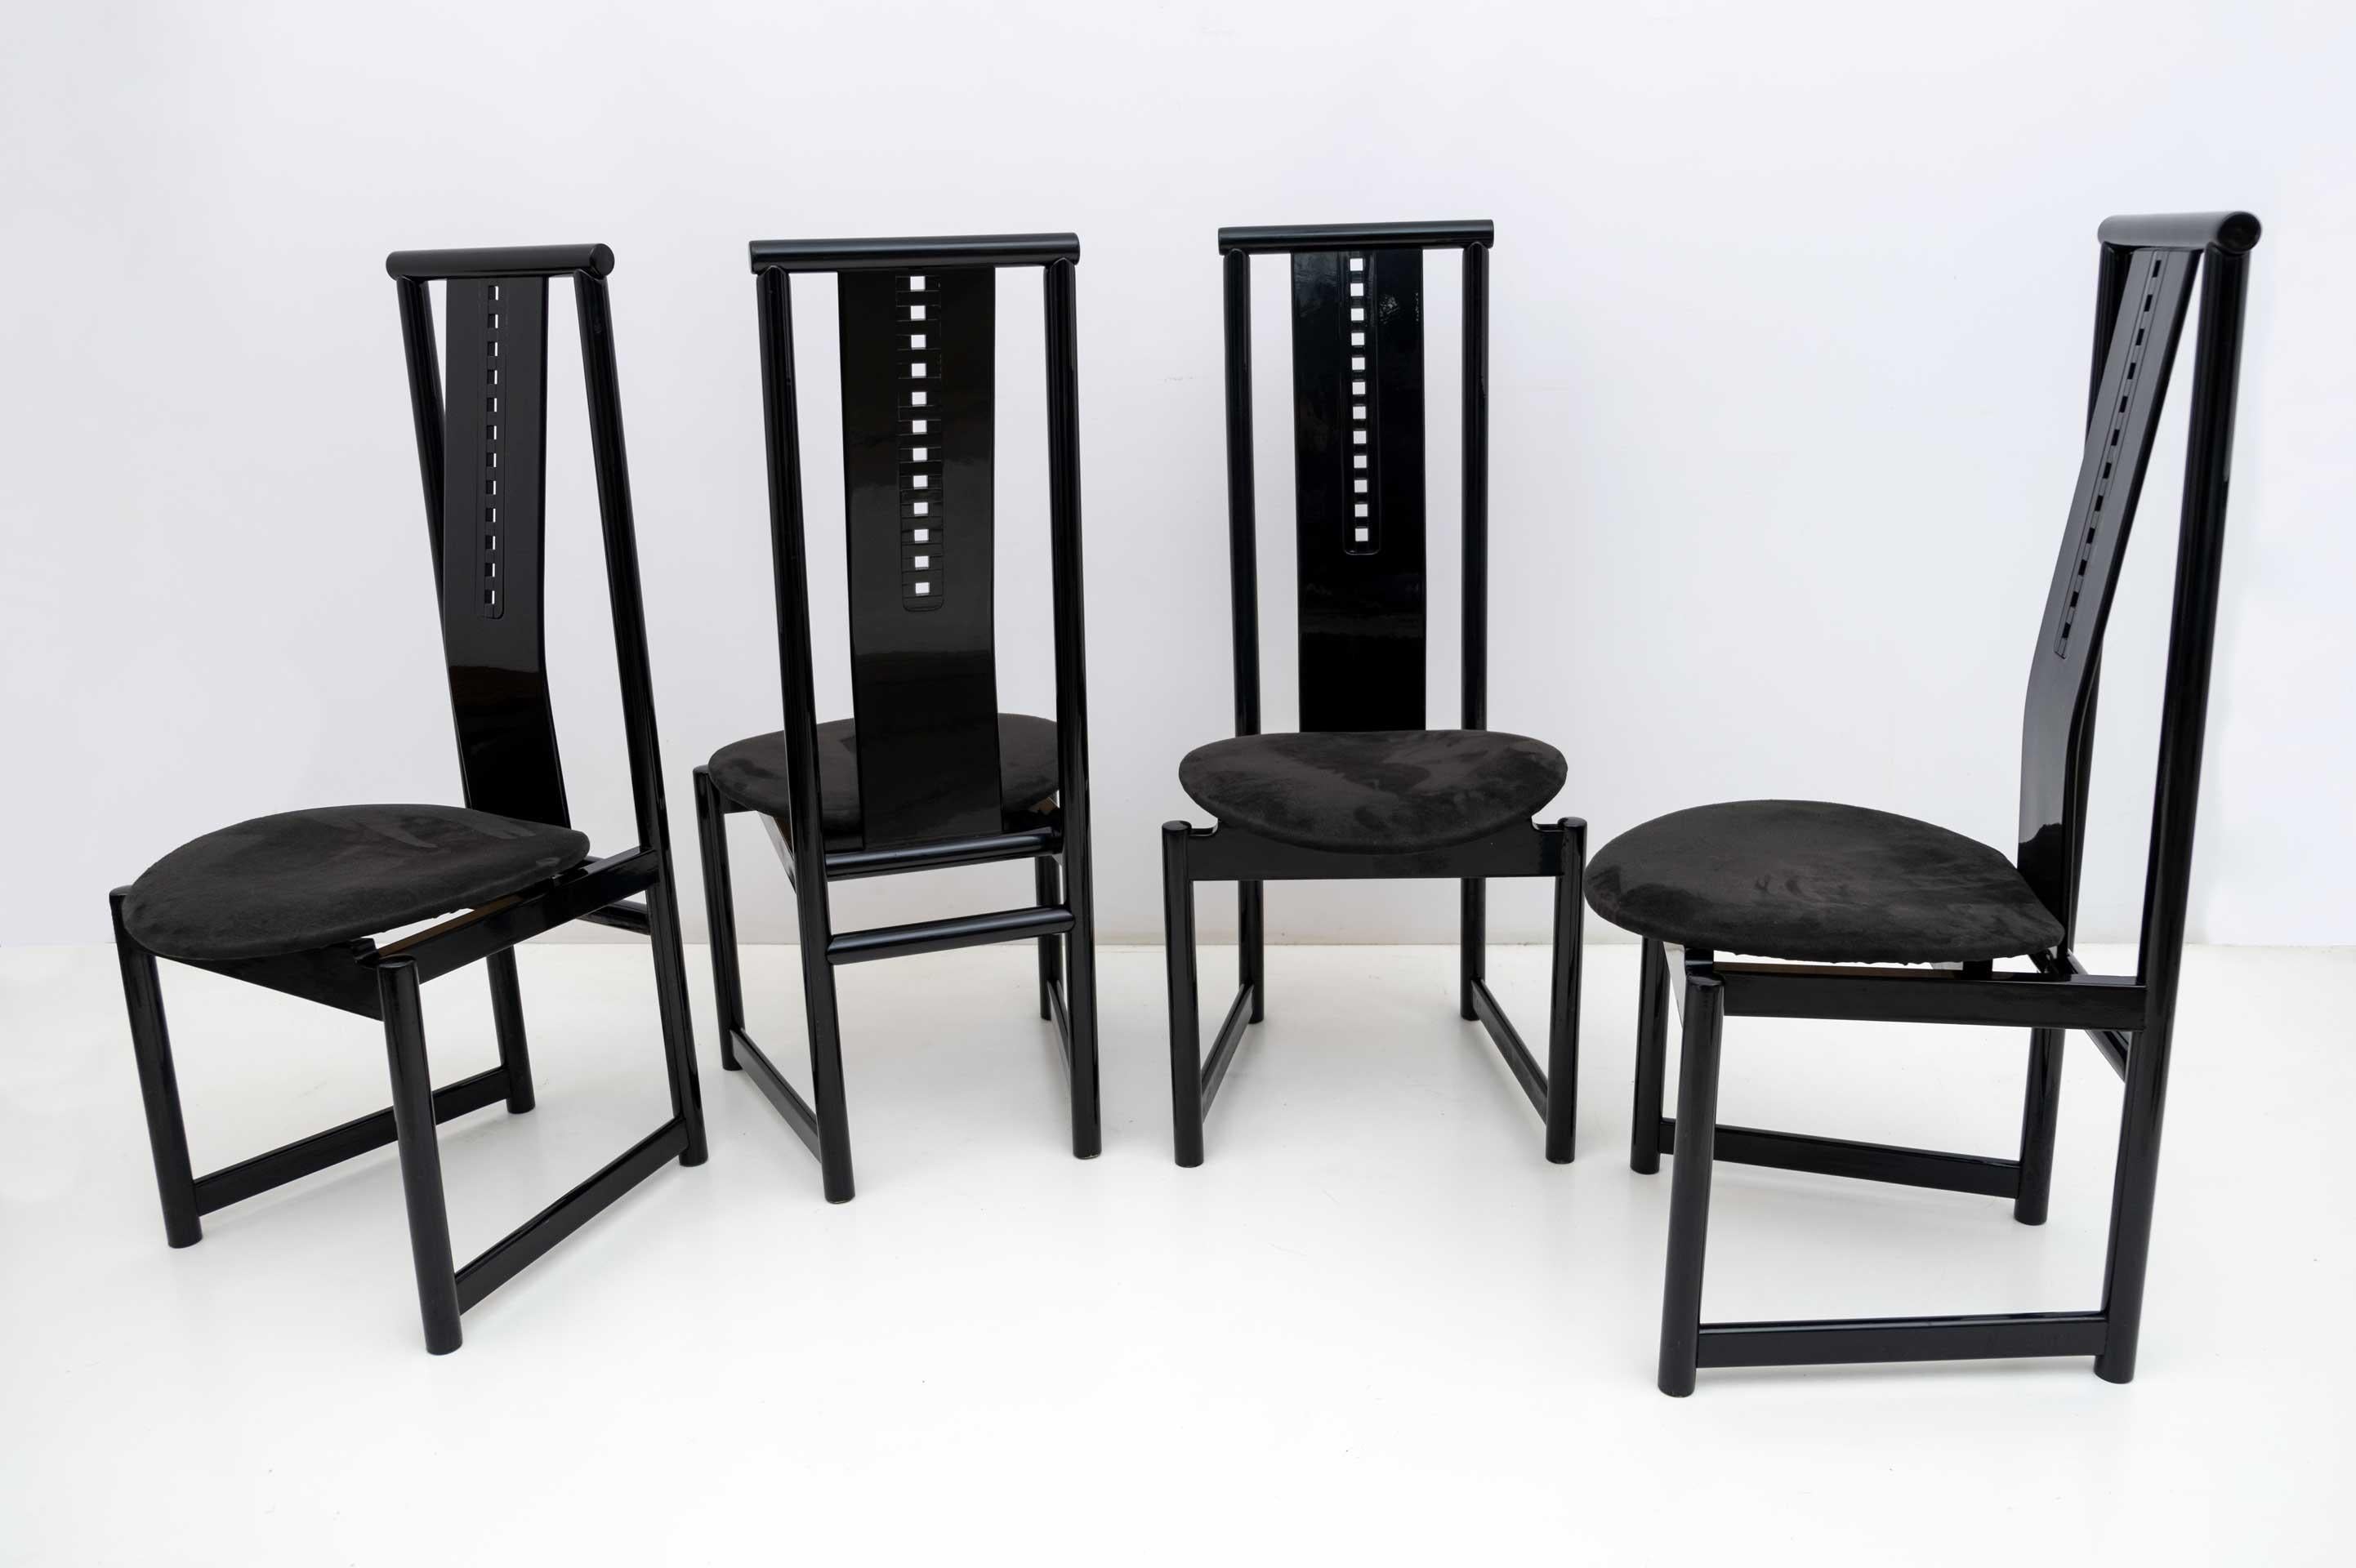 In the style of Scottish architect Charles Rennie Mackintosh. These four chairs, solidly built in black lacquered wood, with black Alcantara upholstery, late 1970s.